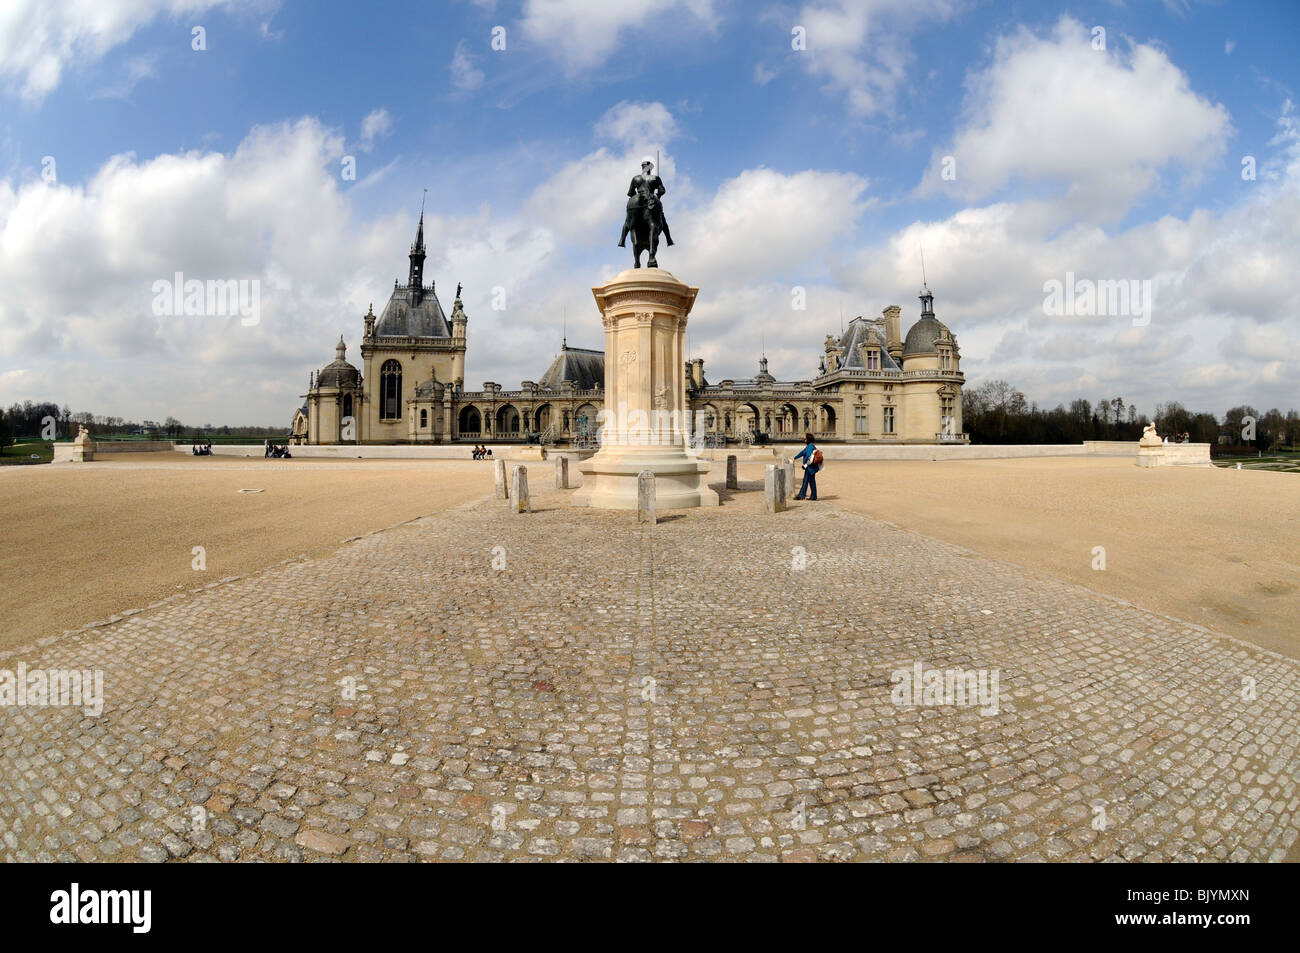 Château de Chantilly - Two In France